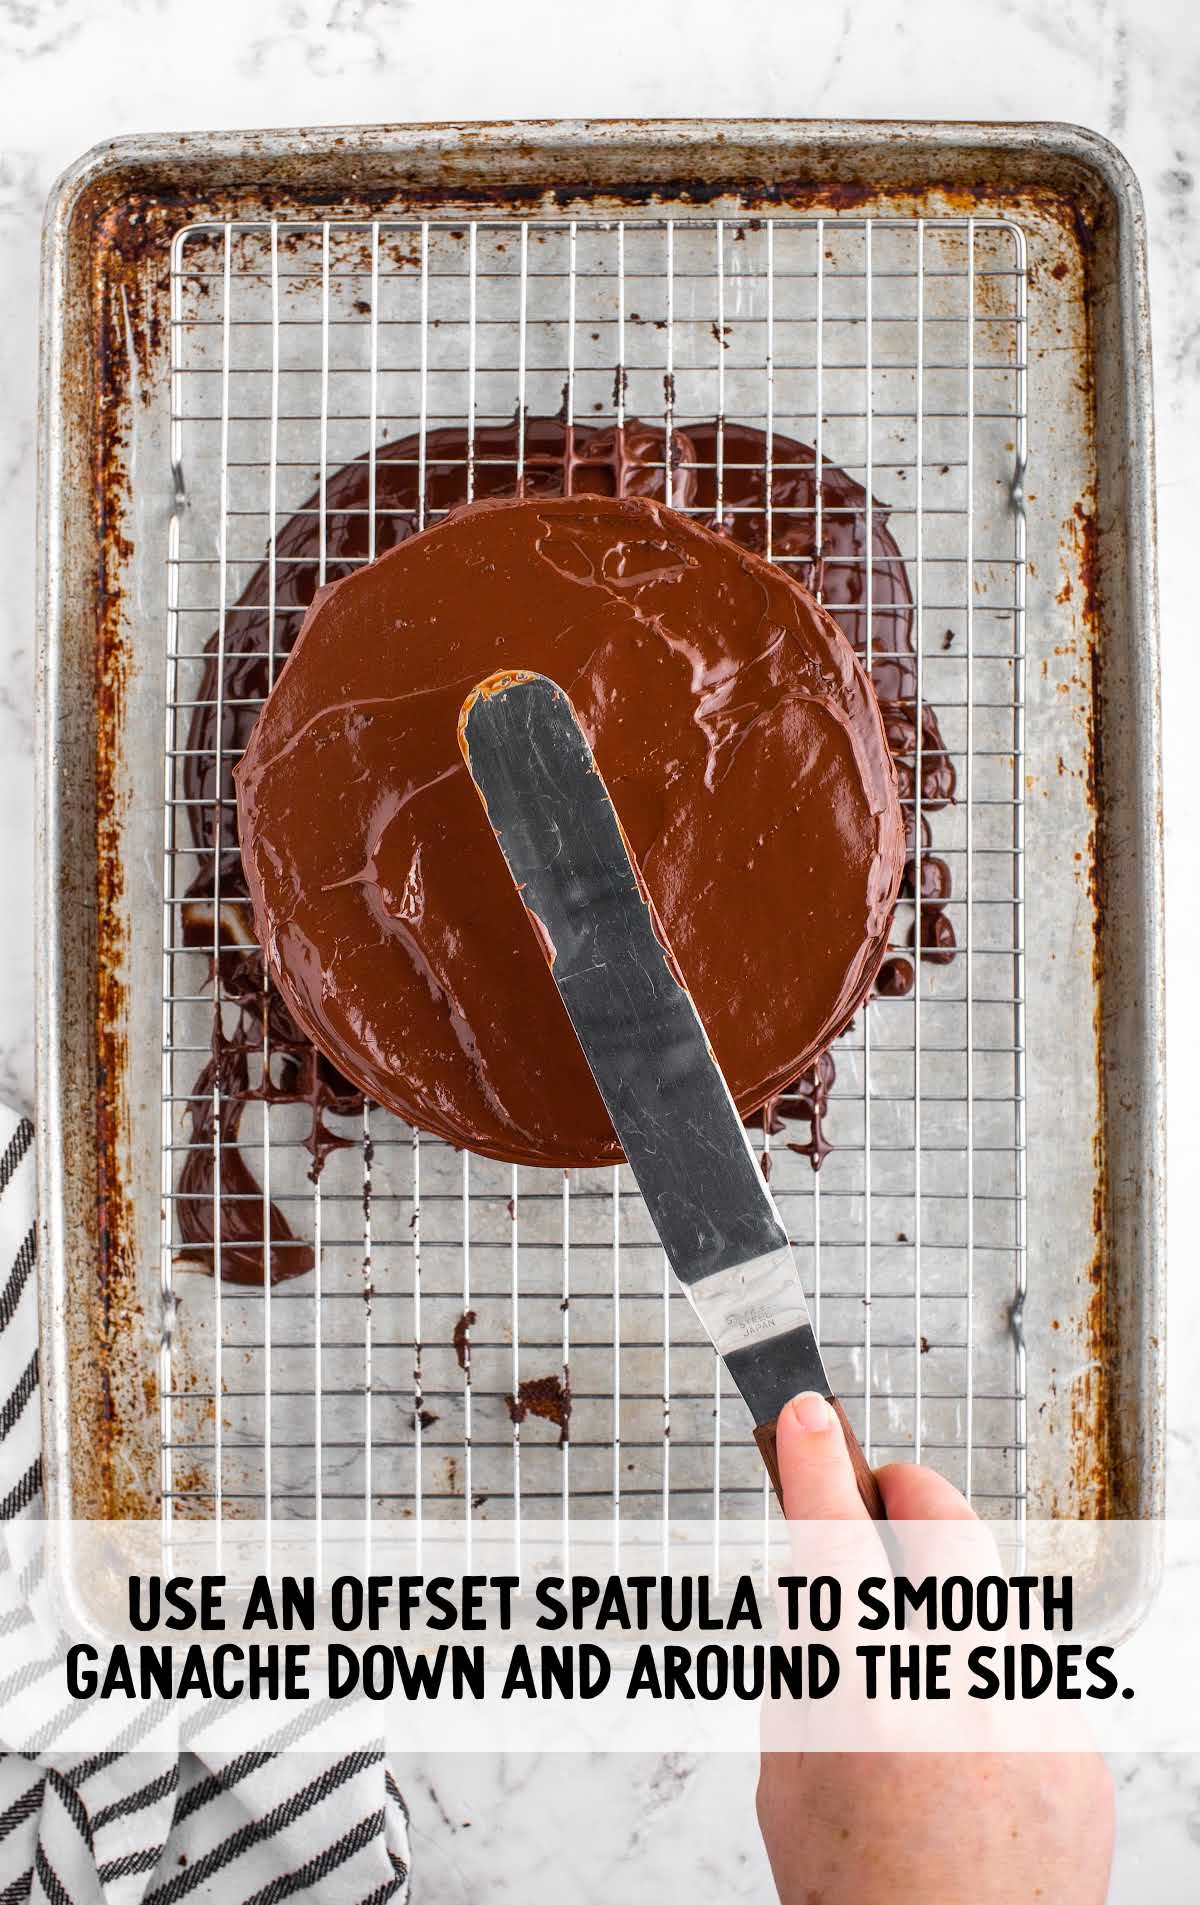 black magic cake process shot of chocolate ganache being spread over cake with a spatula